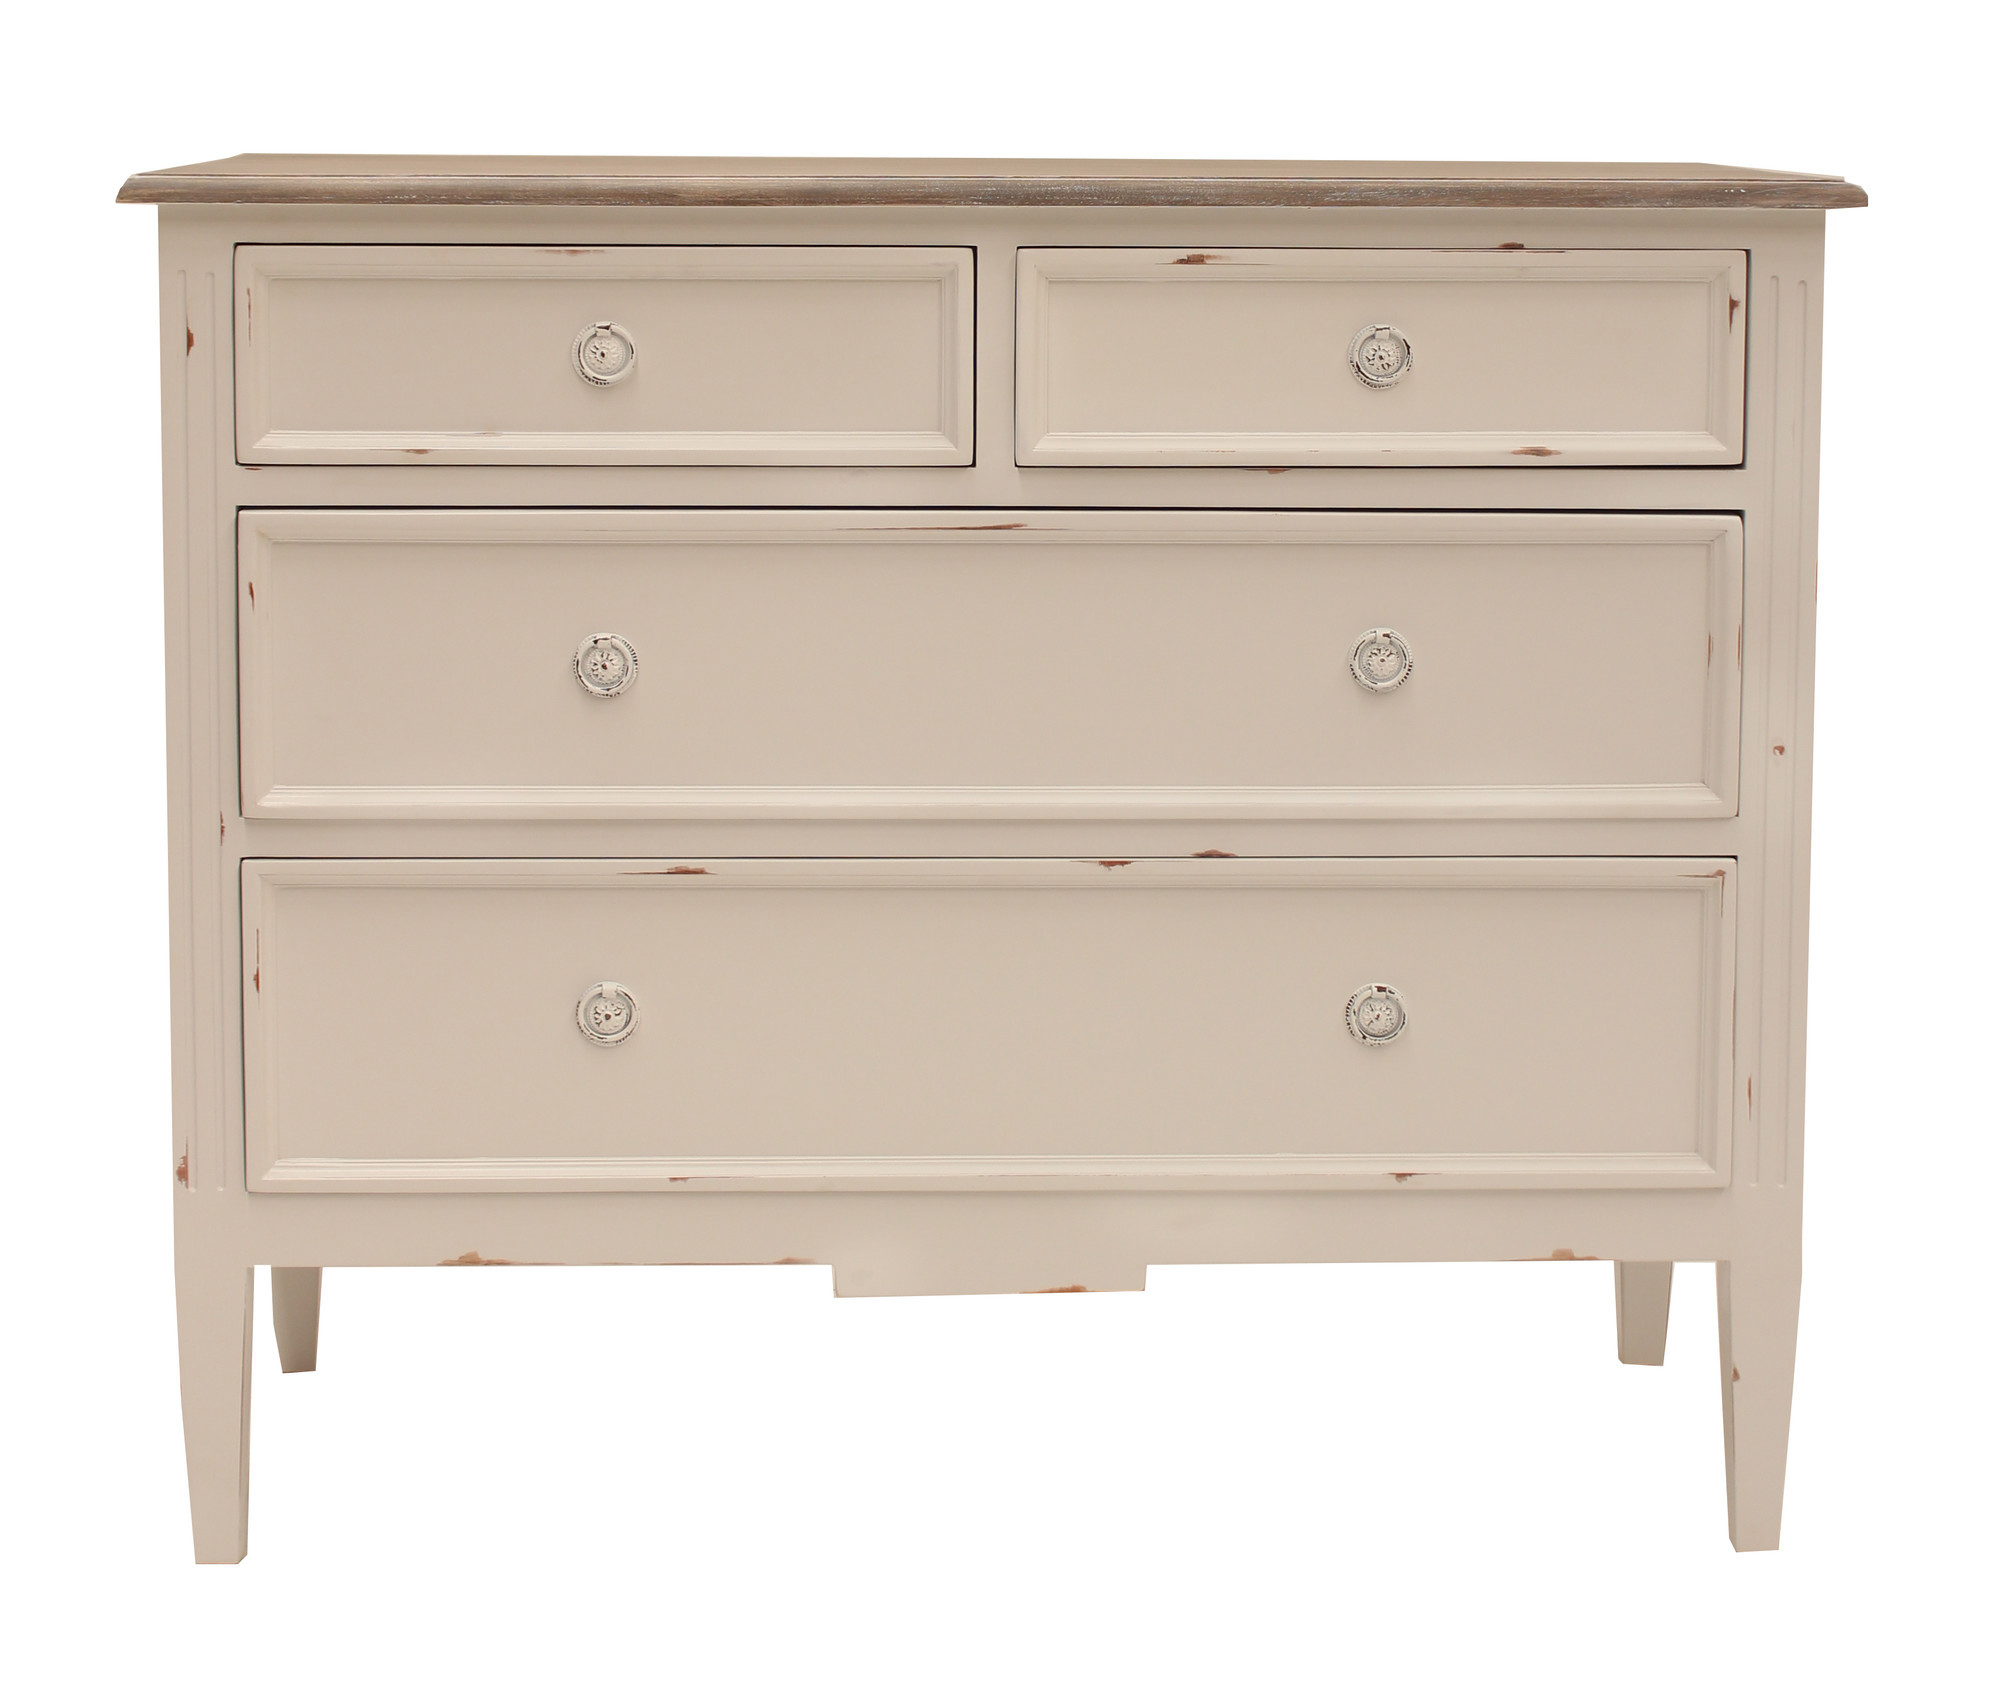 Temple and Webster Chest of Drawers $649